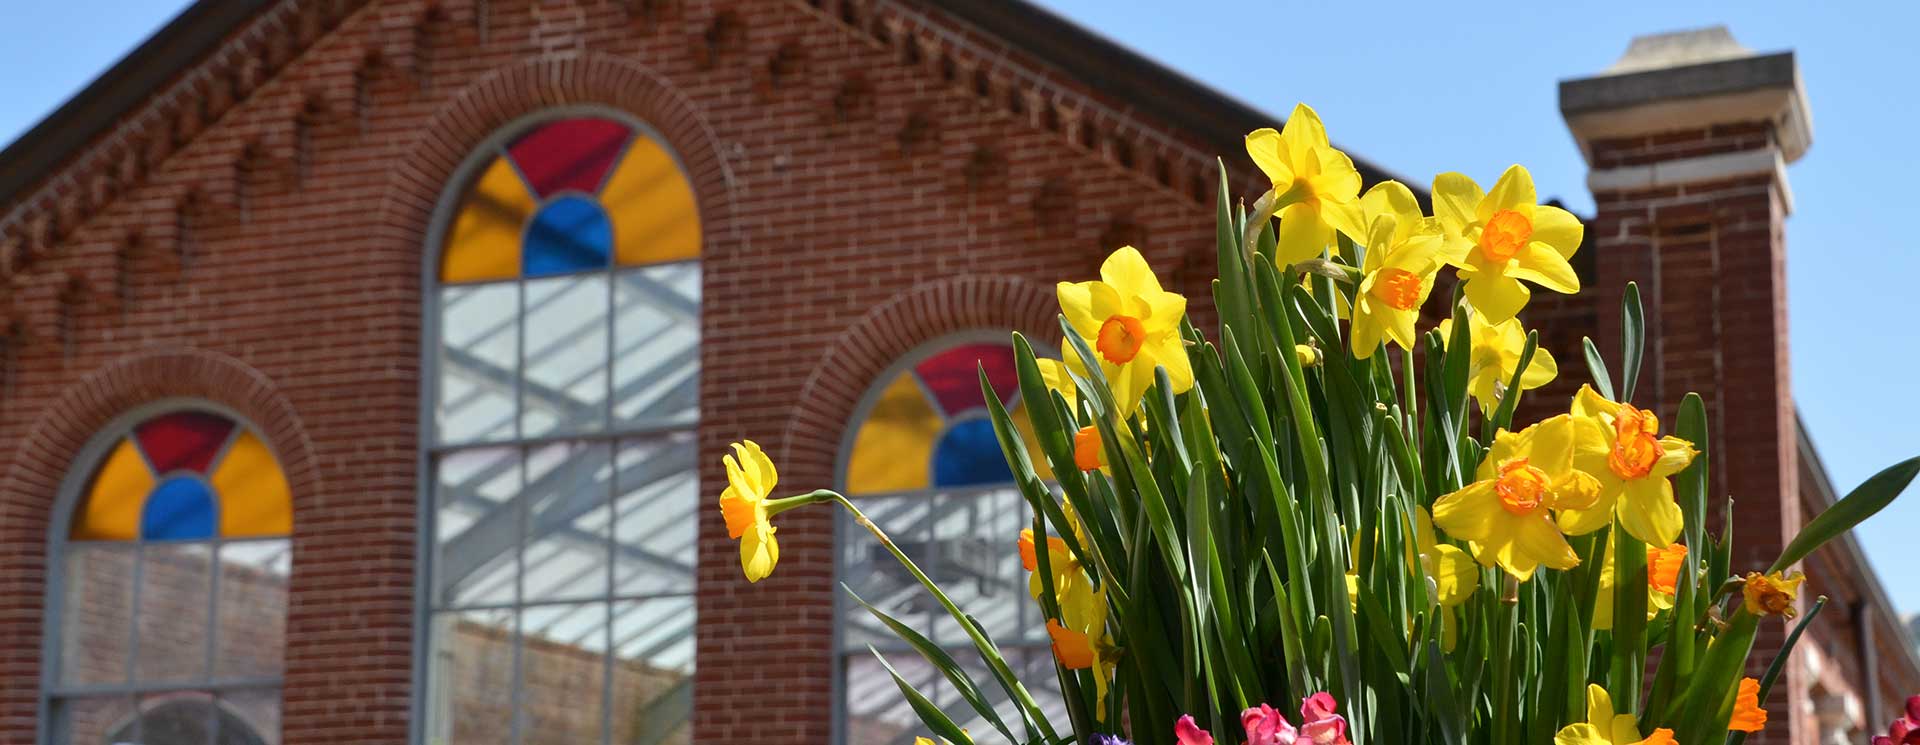 Daffodils in front of a stained glass brick building